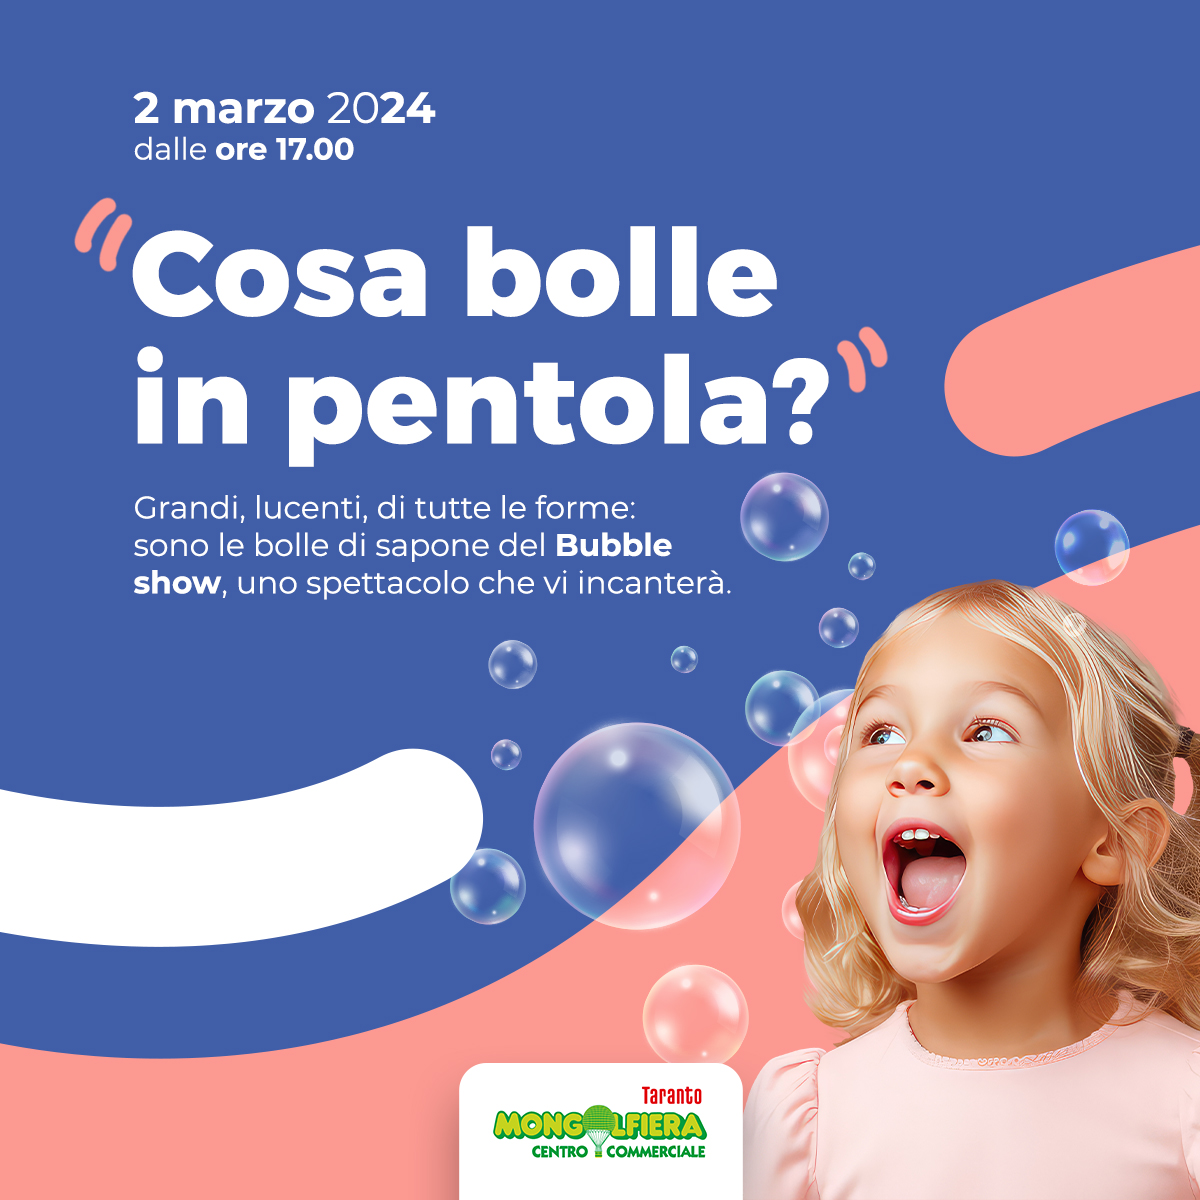 Cosa bolle in pentola?